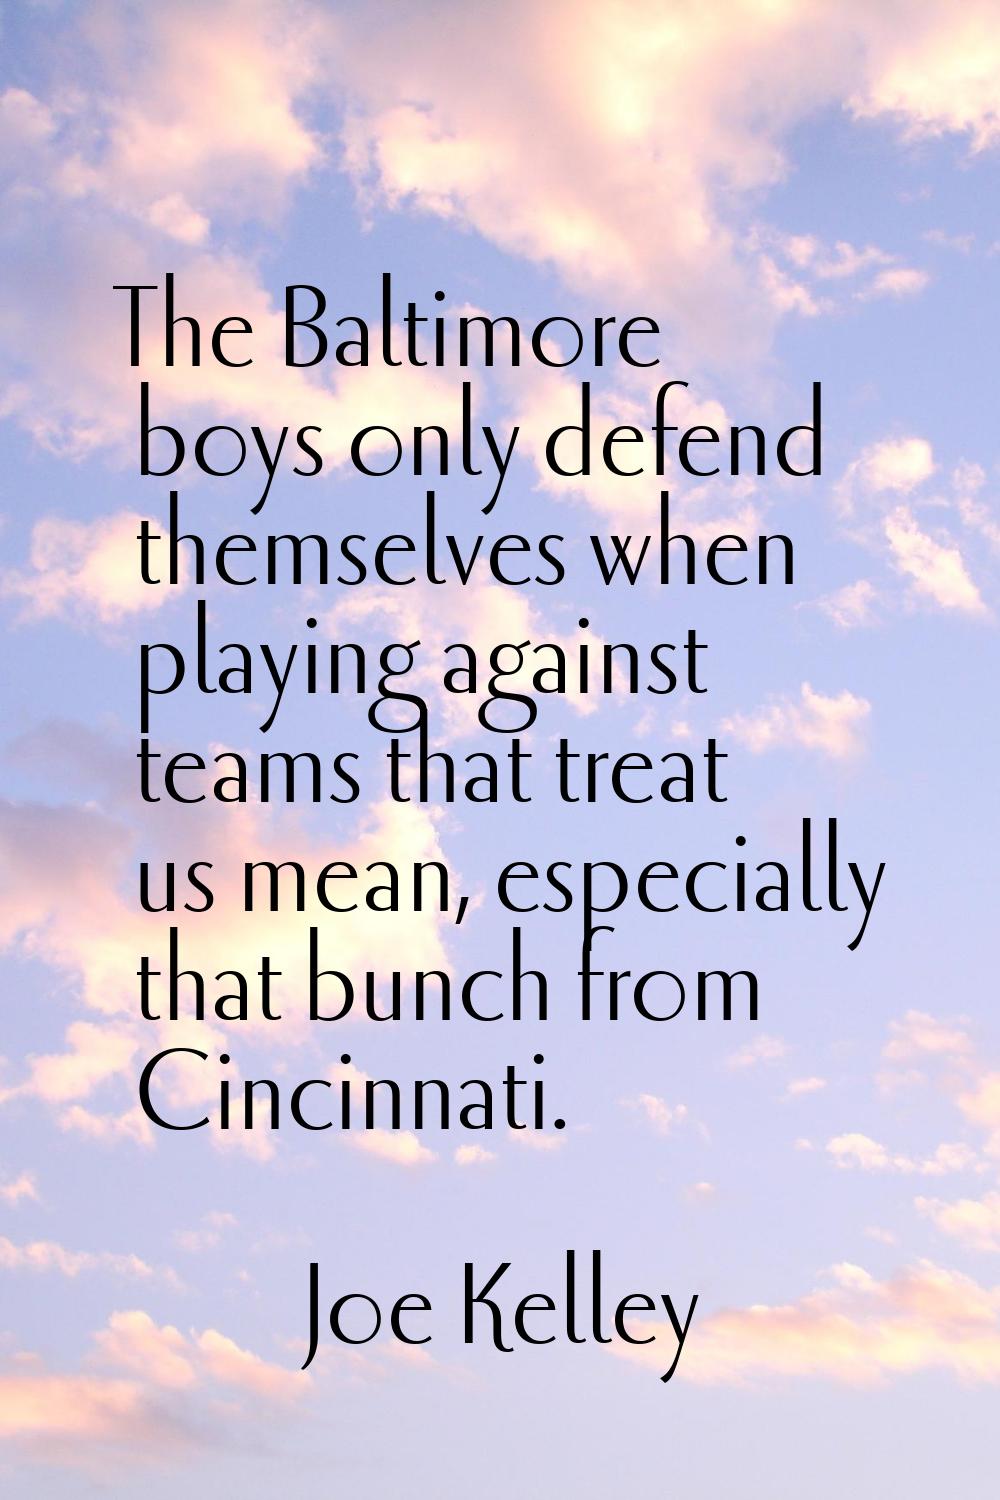 The Baltimore boys only defend themselves when playing against teams that treat us mean, especially